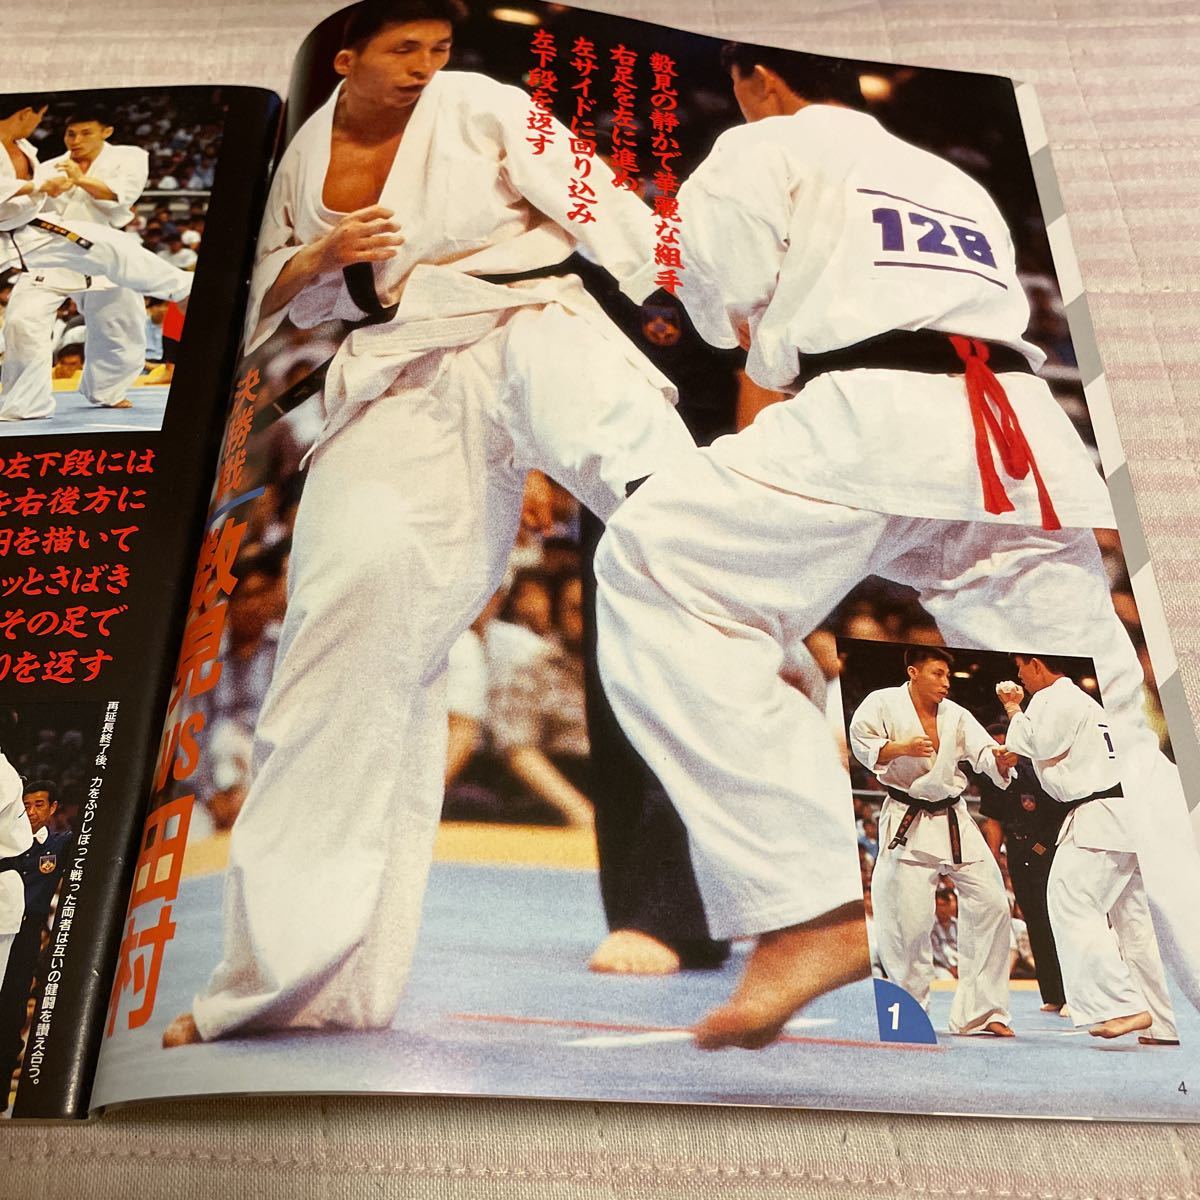  monthly full Contact KARATE vol 83 number 1994 year 1 month special collection number see,* quiet ... beauty . collection hand ~. body reality ultimate genuine . pavilion US large mountain ka Latte other luck ..